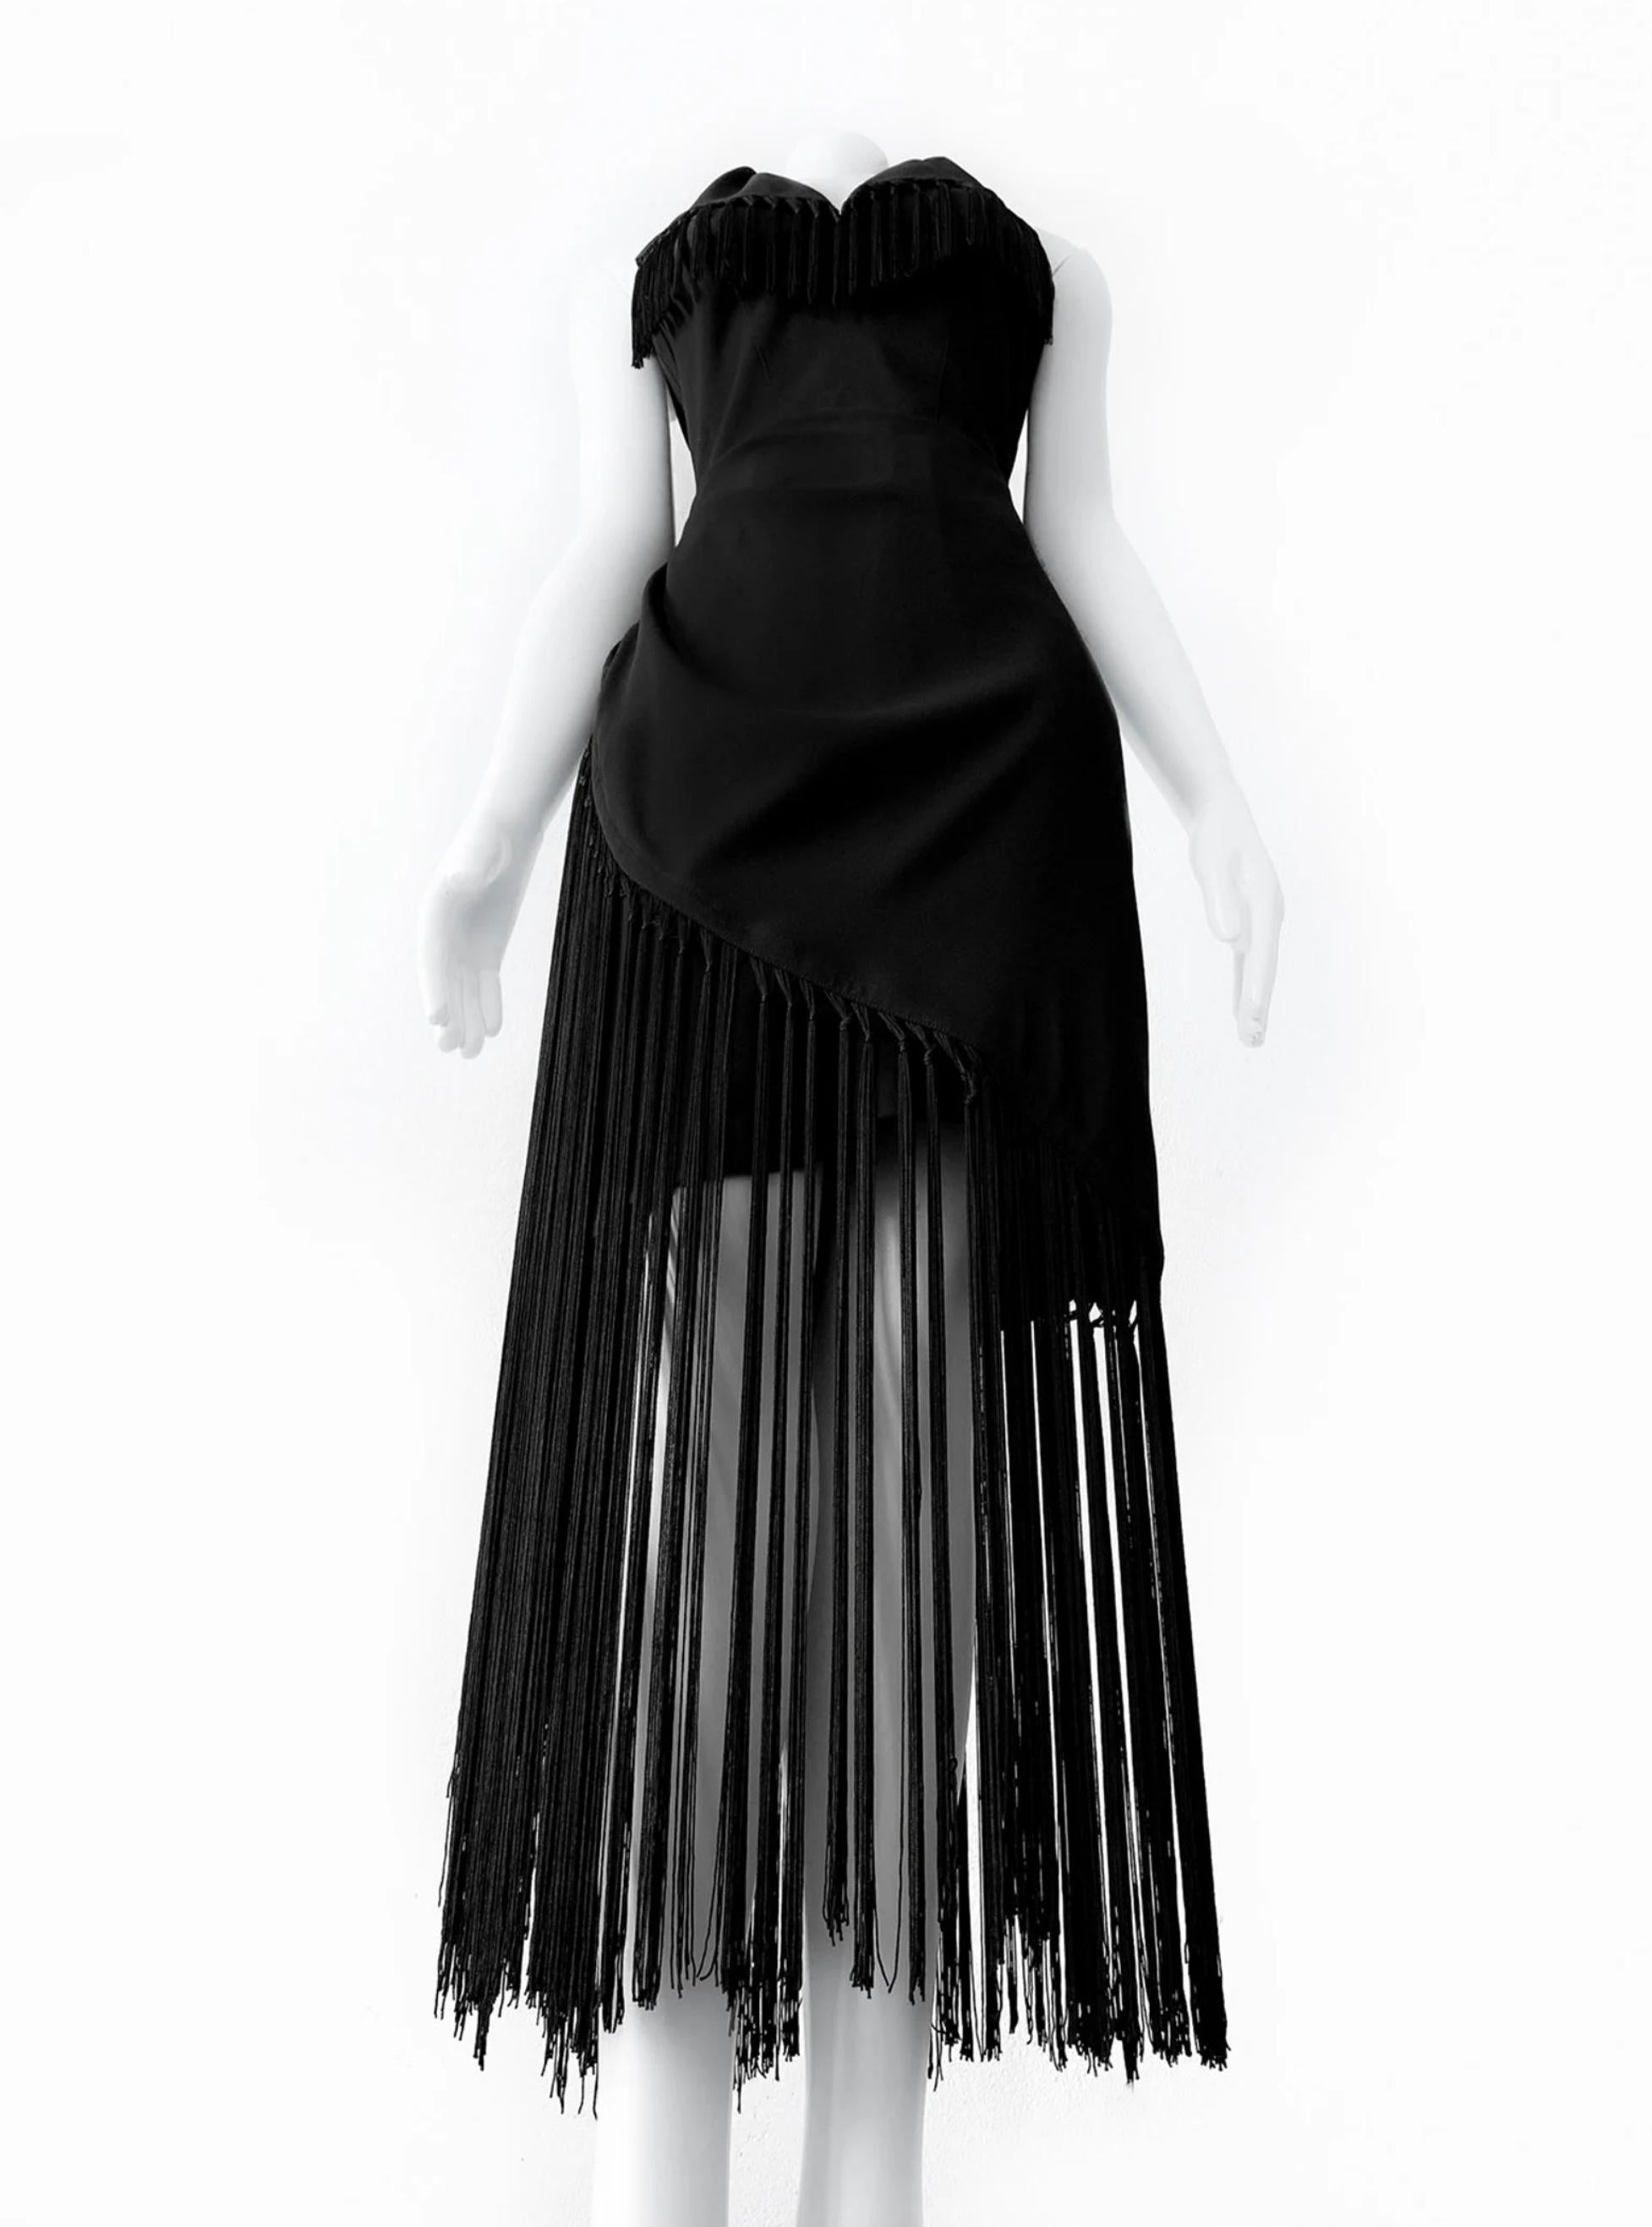 Thierry Mugler SS1997 Gorgeous Black Evening Dress Fringe Elegant Vintage 90s  In Excellent Condition For Sale In Berlin, BE